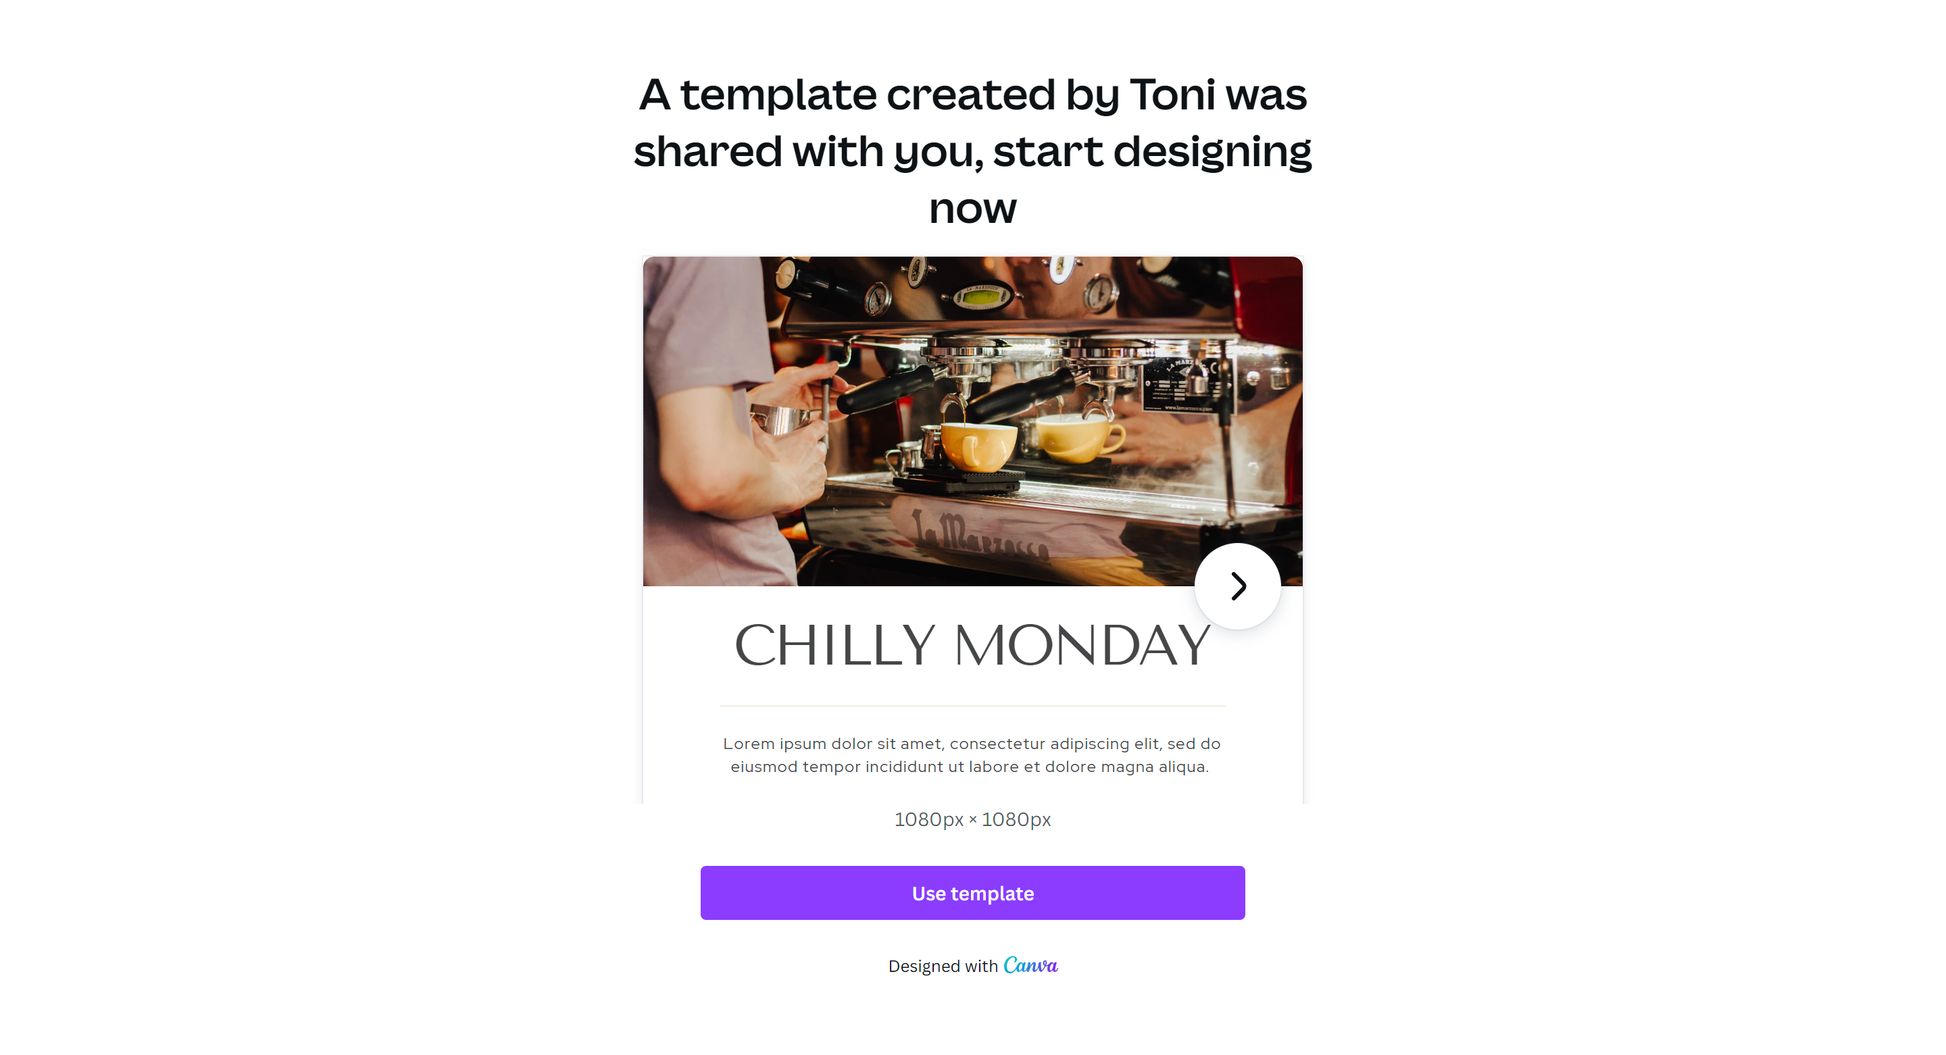 Instagram Post Templates Canva -50 Posts for Instagram - Coffee House Instagram Templates - Coffee Shop Aesthetic